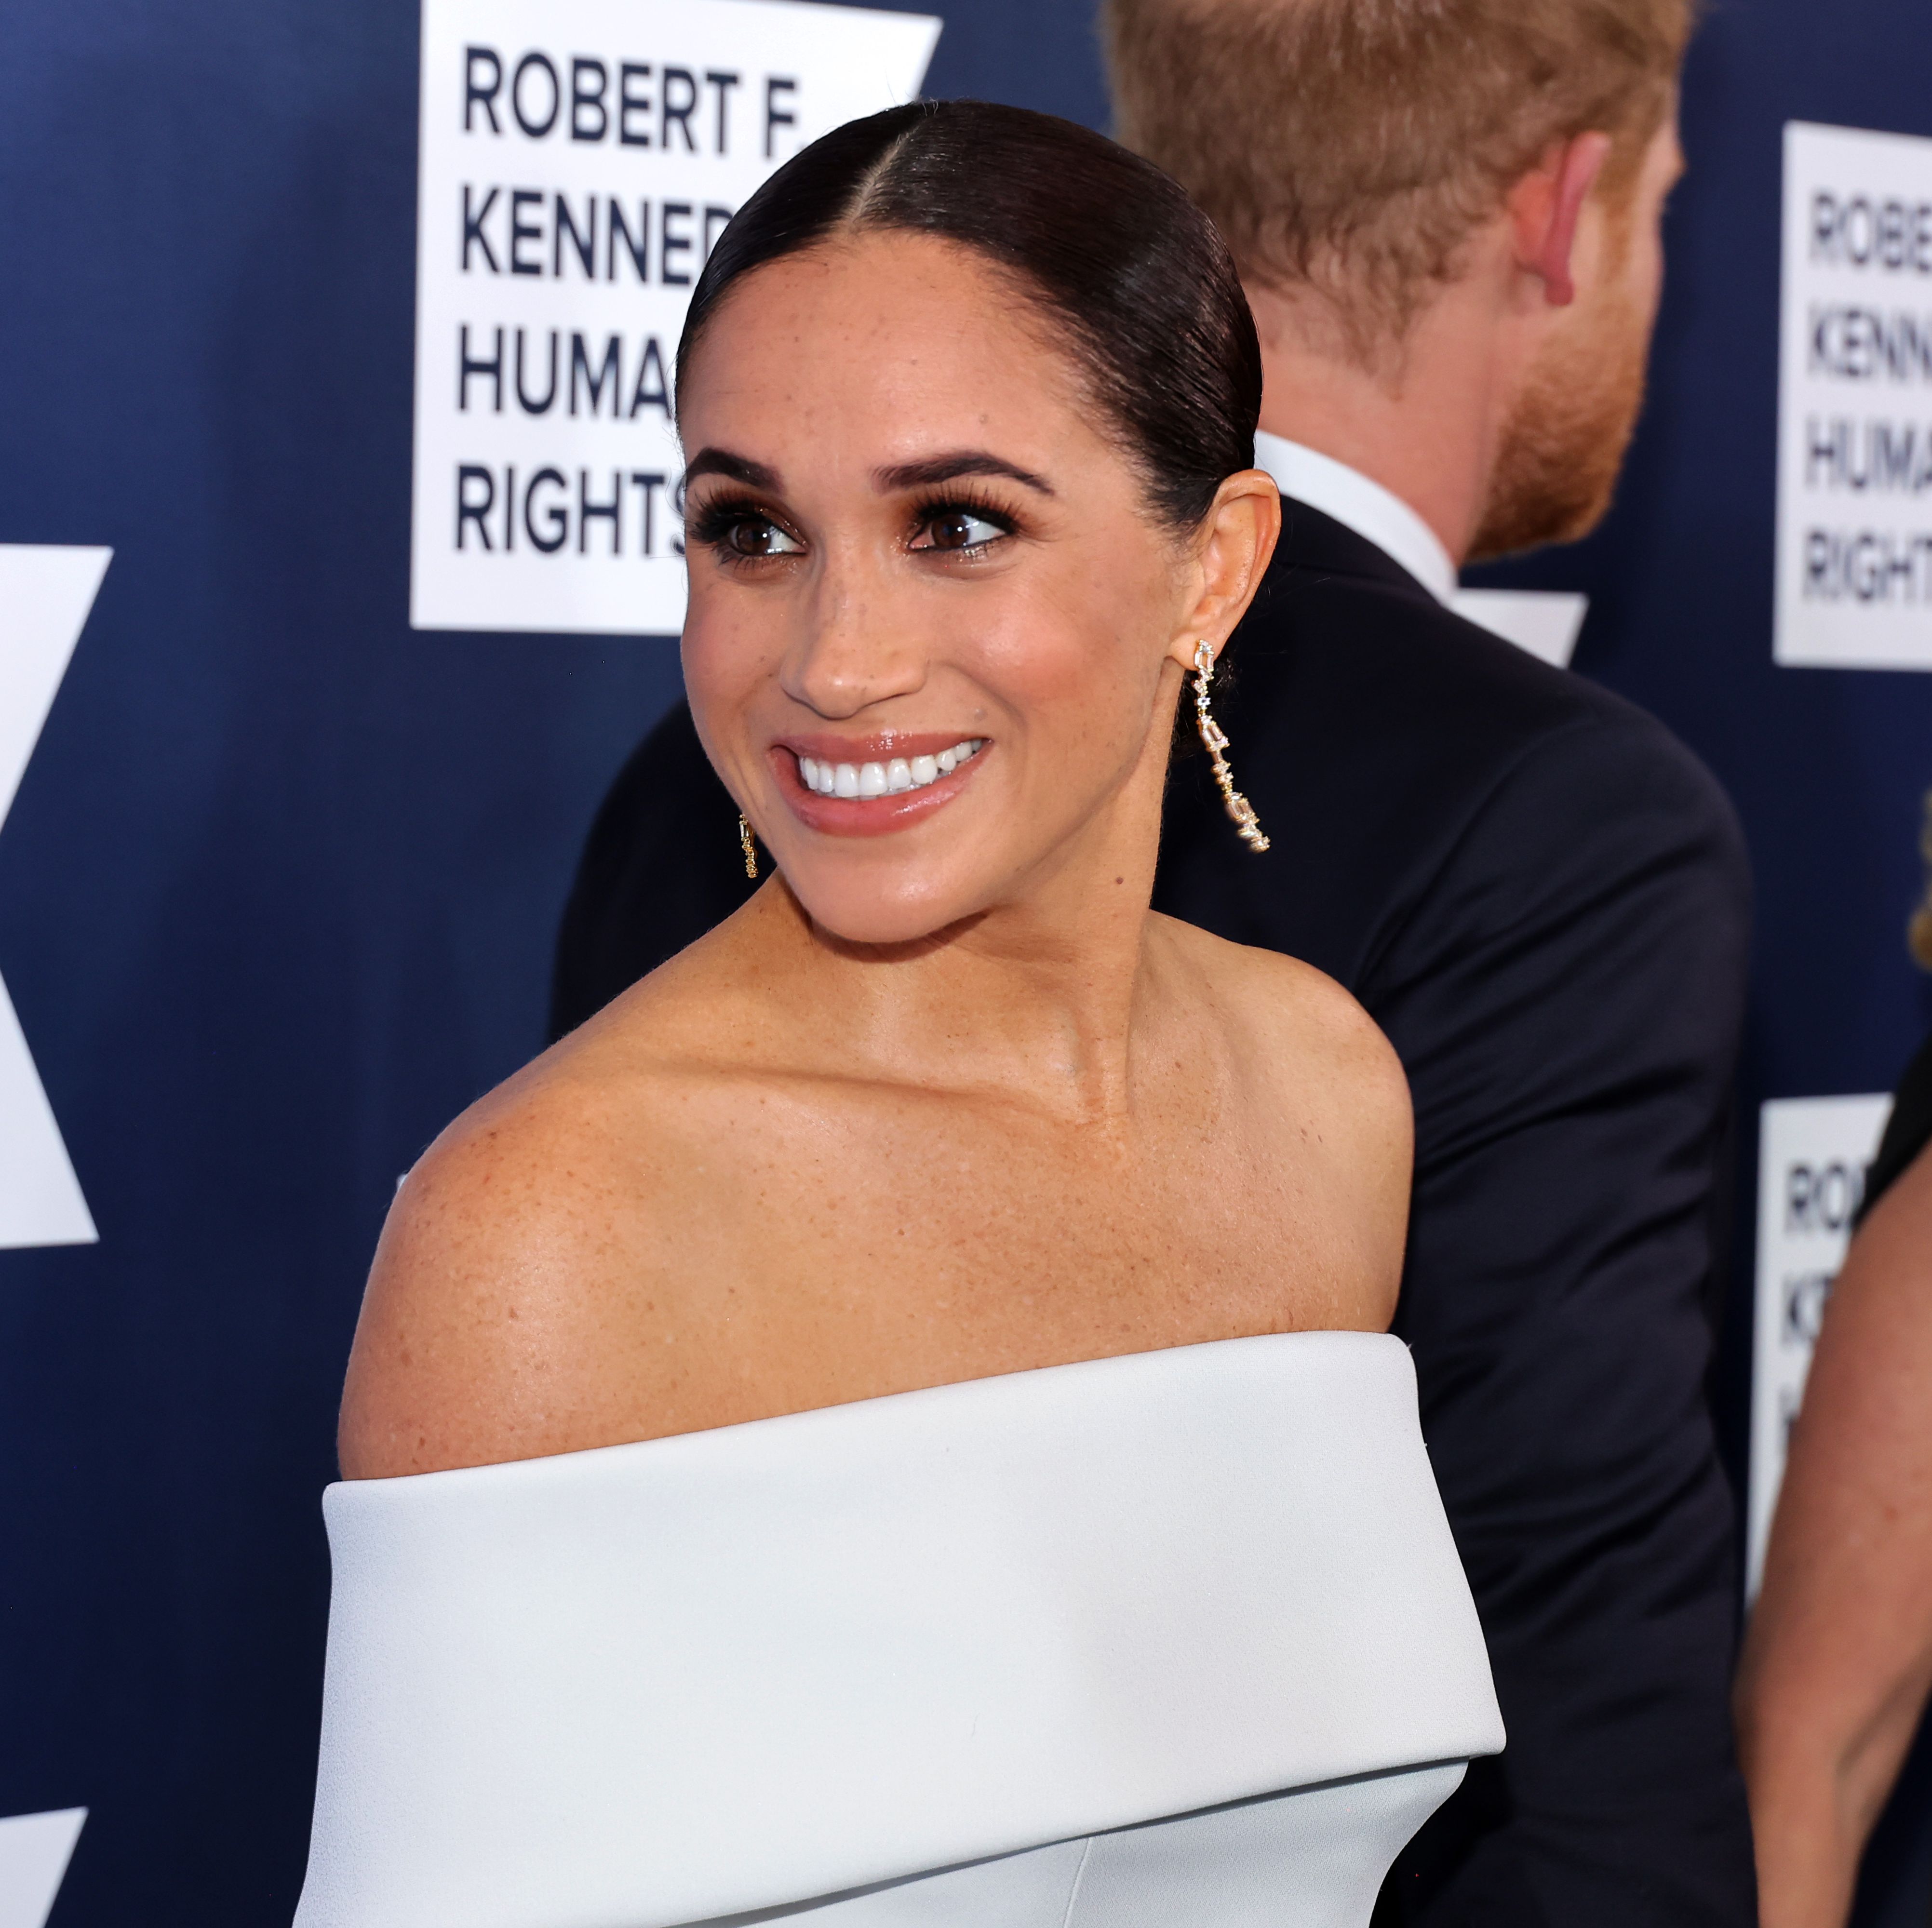 Her friend gushed about what a wonderful mom the Duchess of Sussex is.